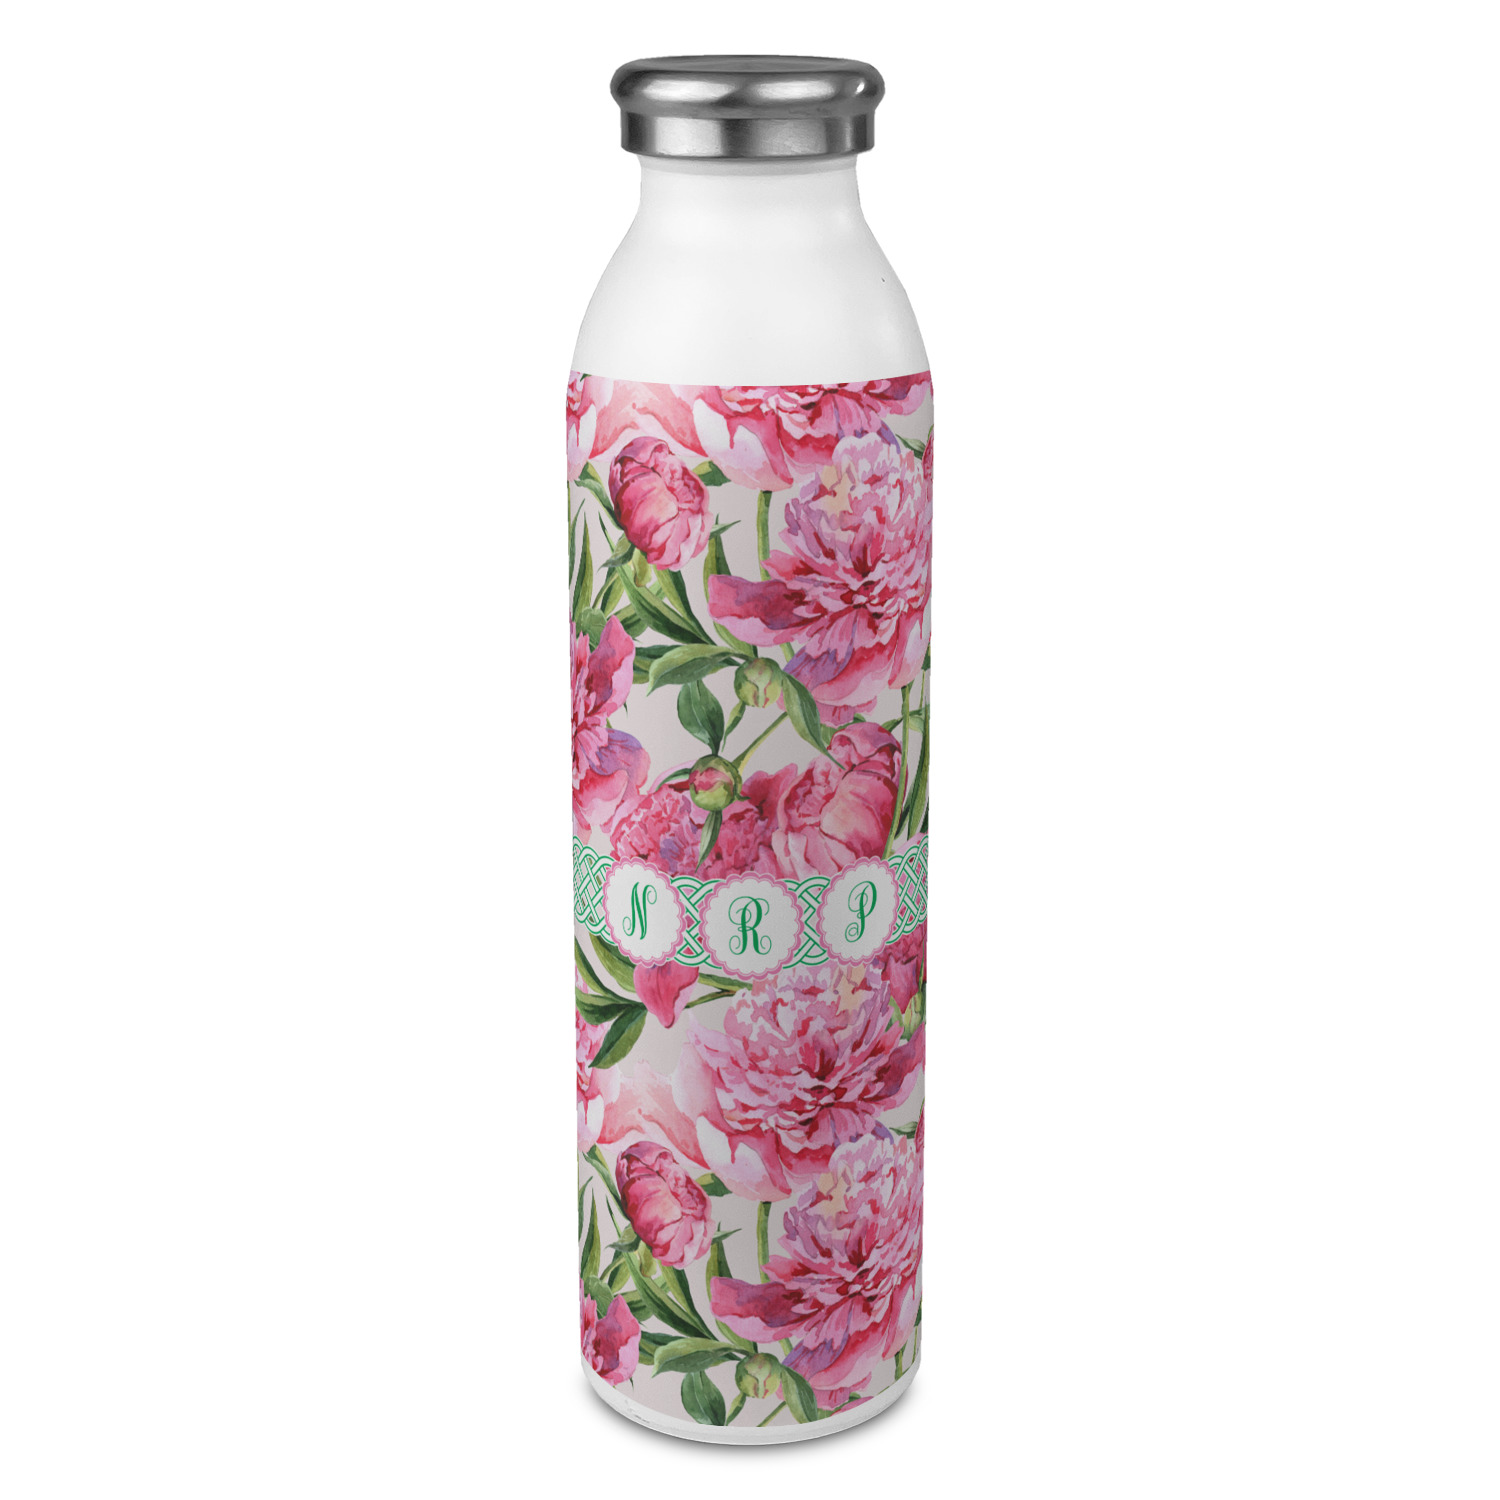 https://www.youcustomizeit.com/common/MAKE/488580/Watercolor-Peonies-20oz-Water-Bottles-Full-Print-Front-Main.jpg?lm=1665526445